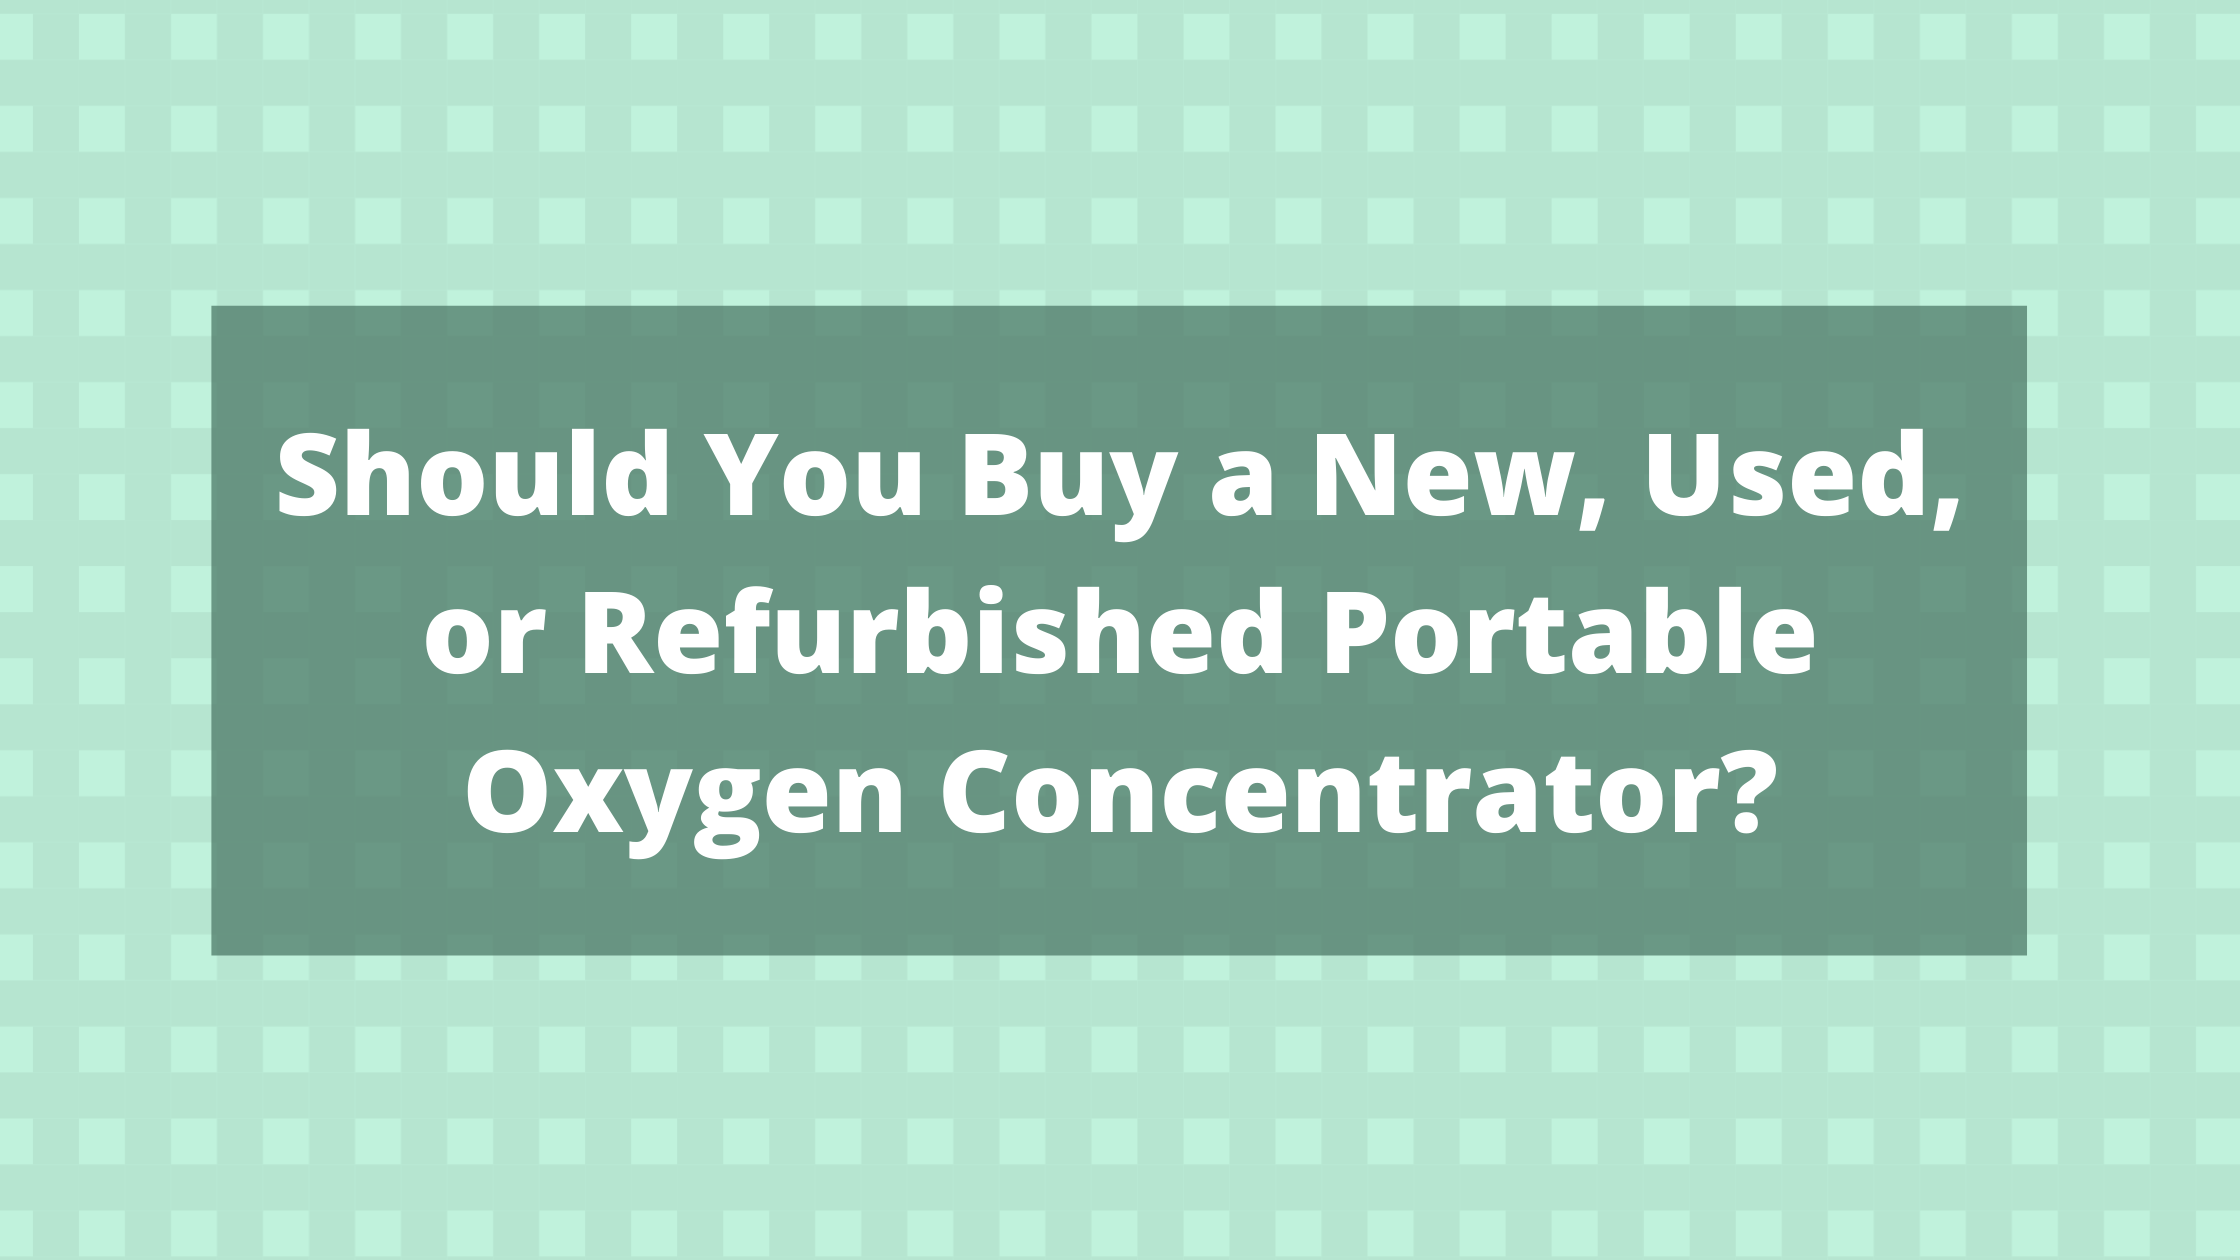 Should You Buy a New, Used, or Refurbished Portable Oxygen Concentrator?